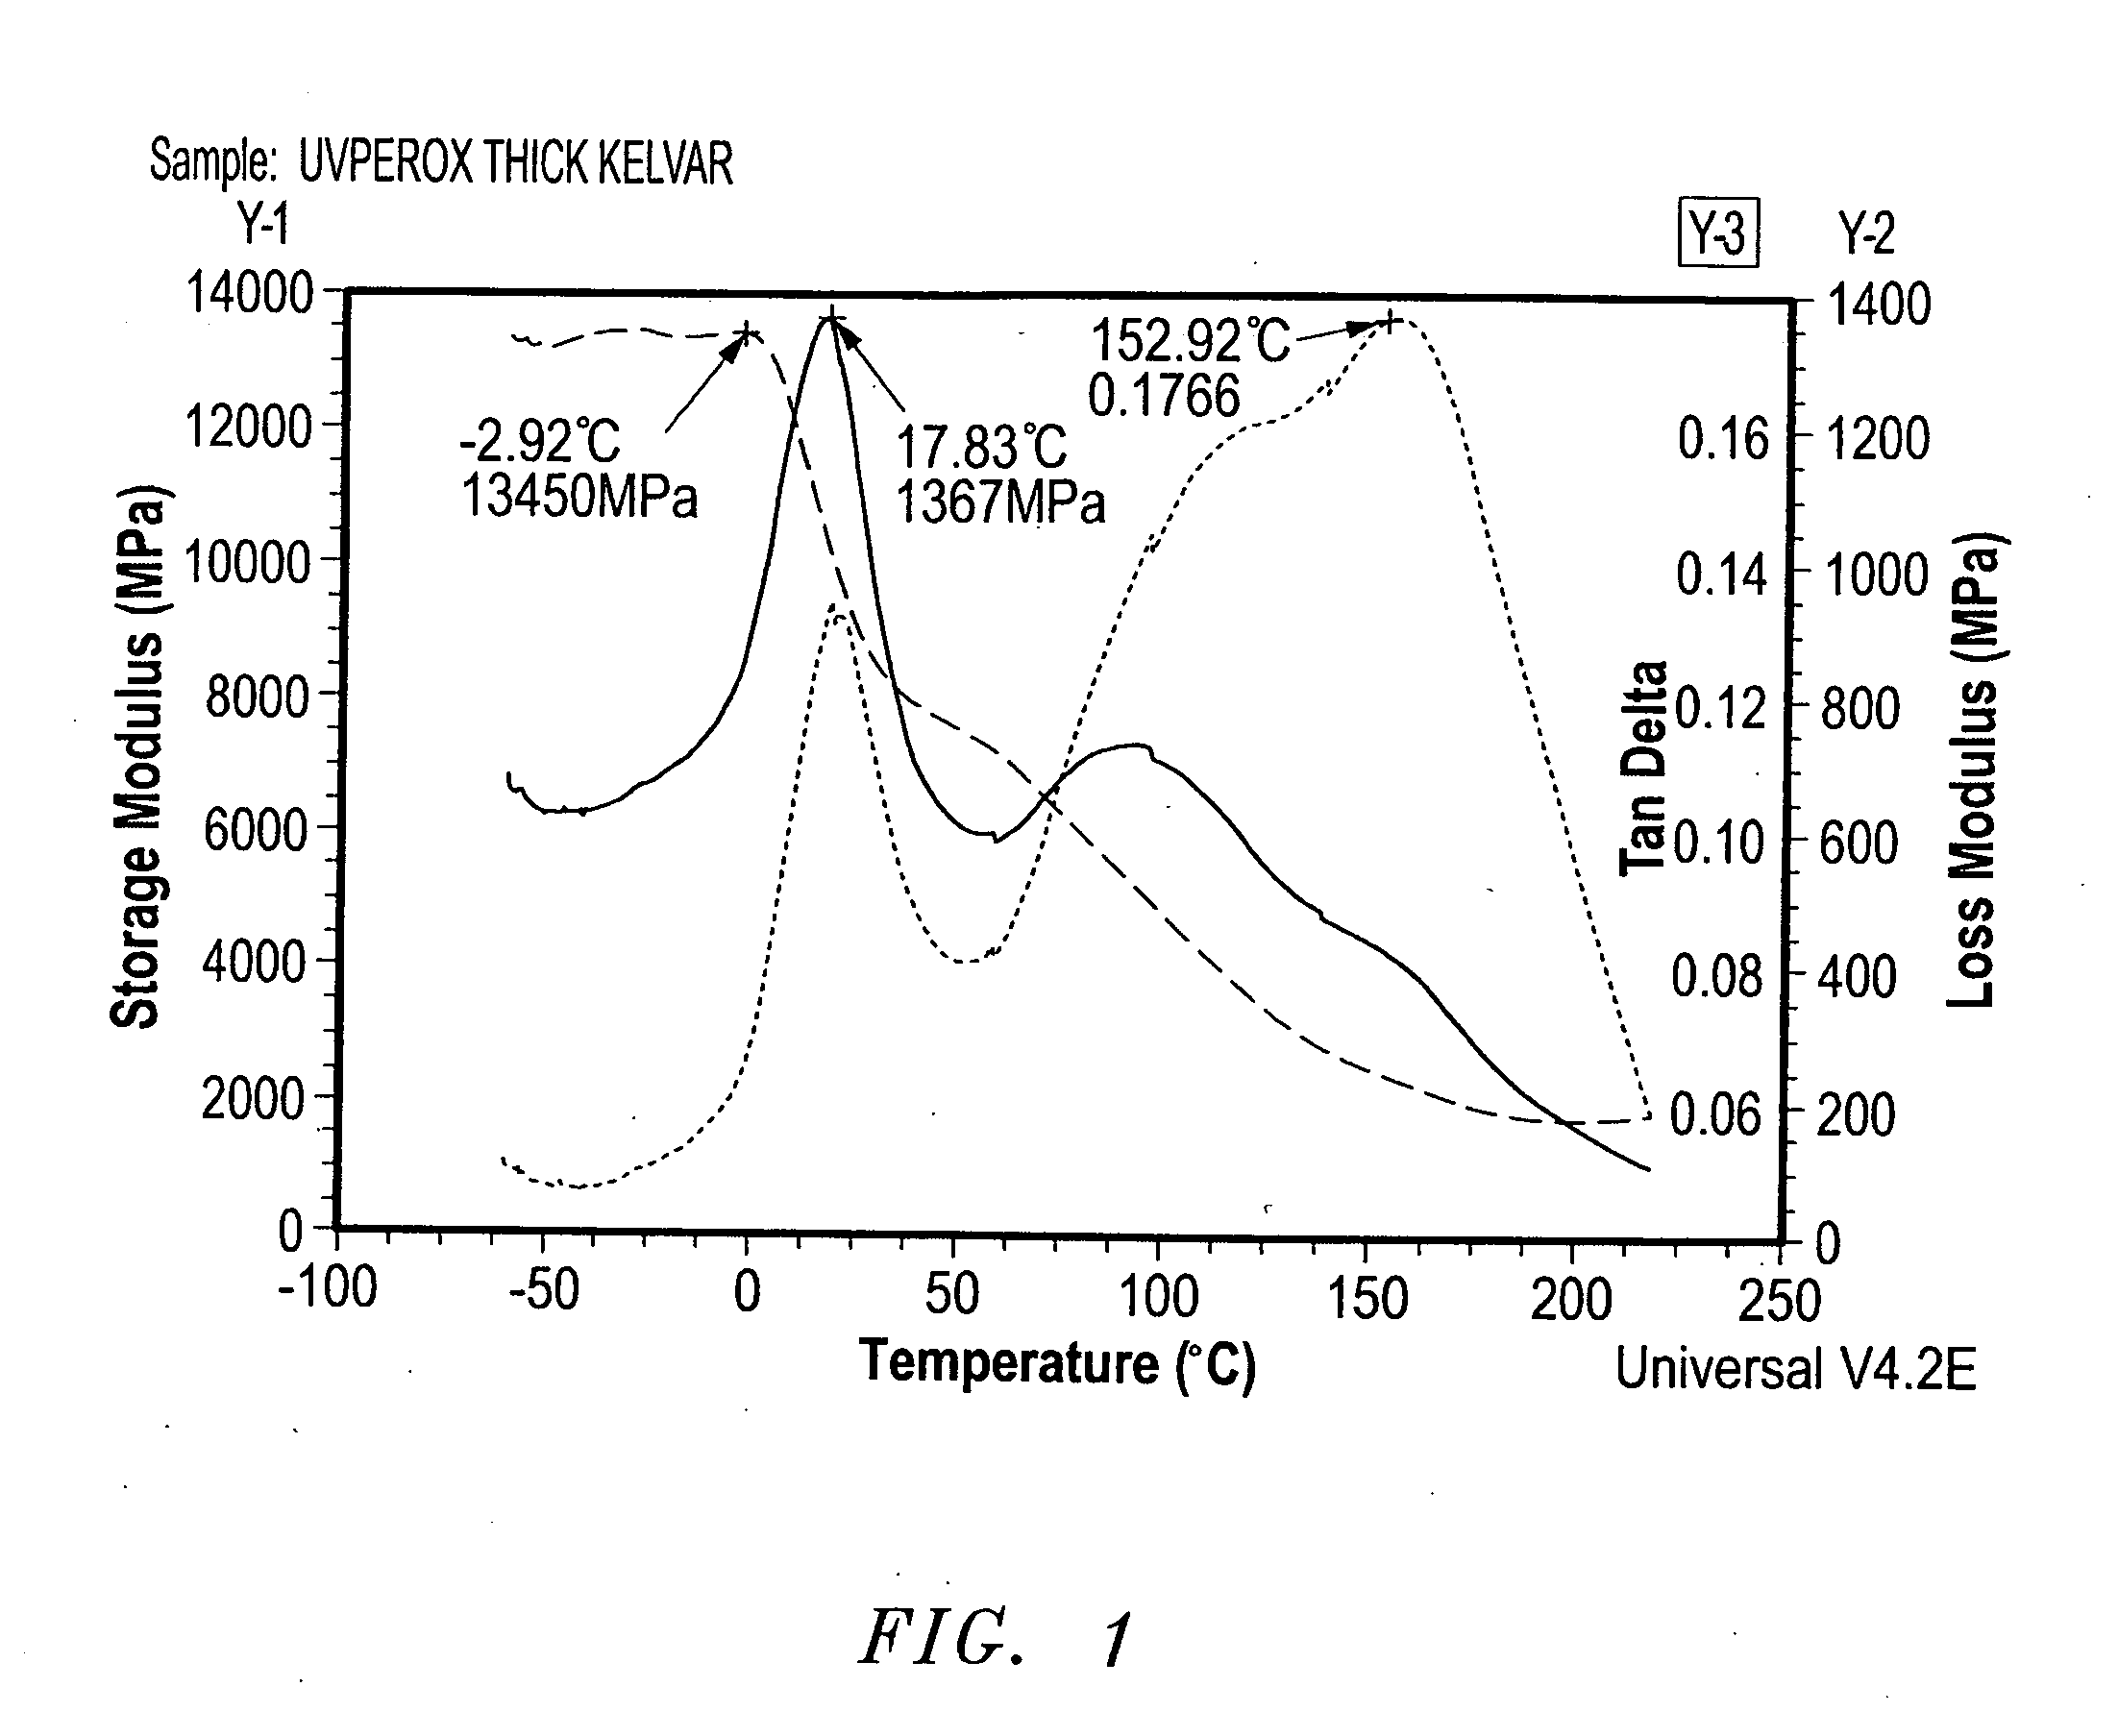 Ultraviolet light curing compositions for composite repair